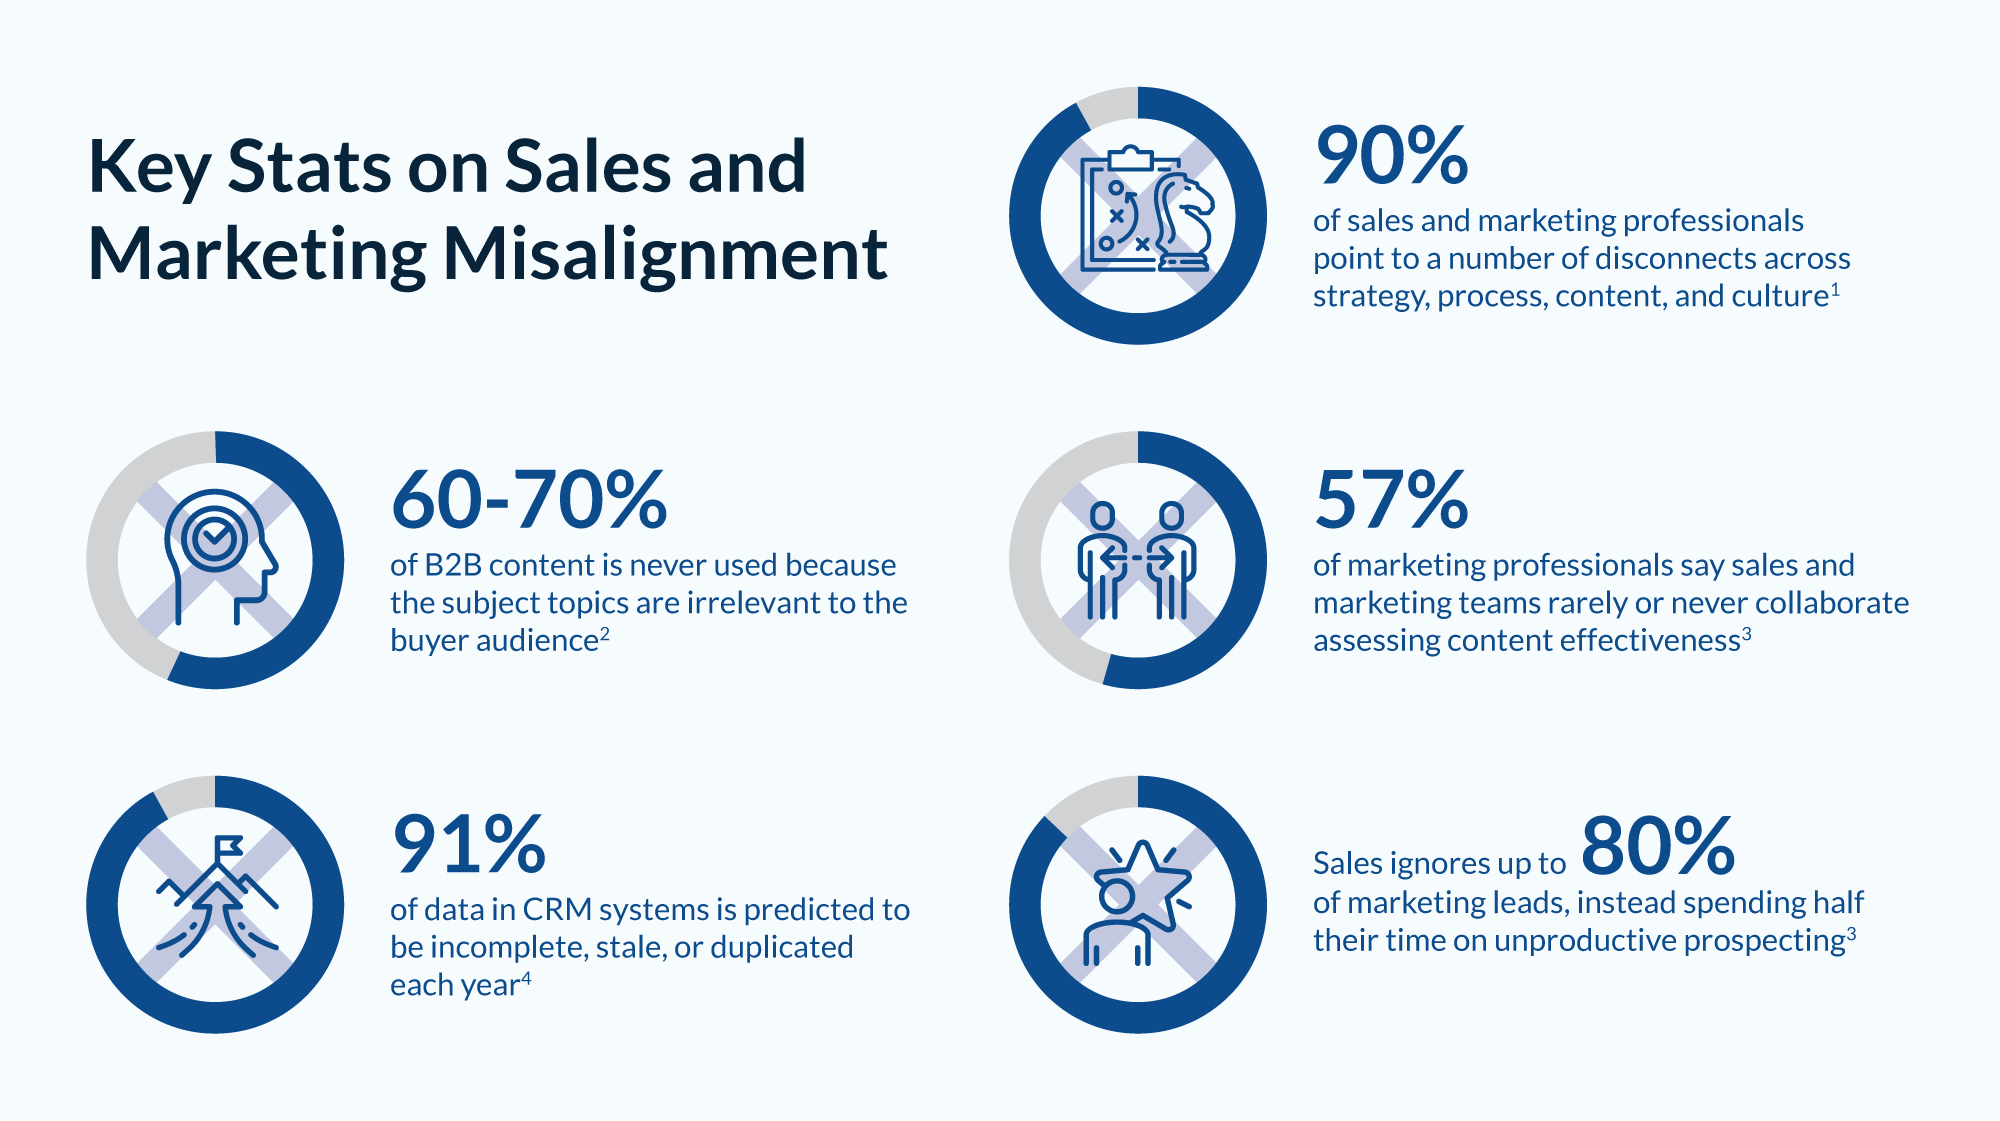 Key Stats on Sales and Marketing Misalignment